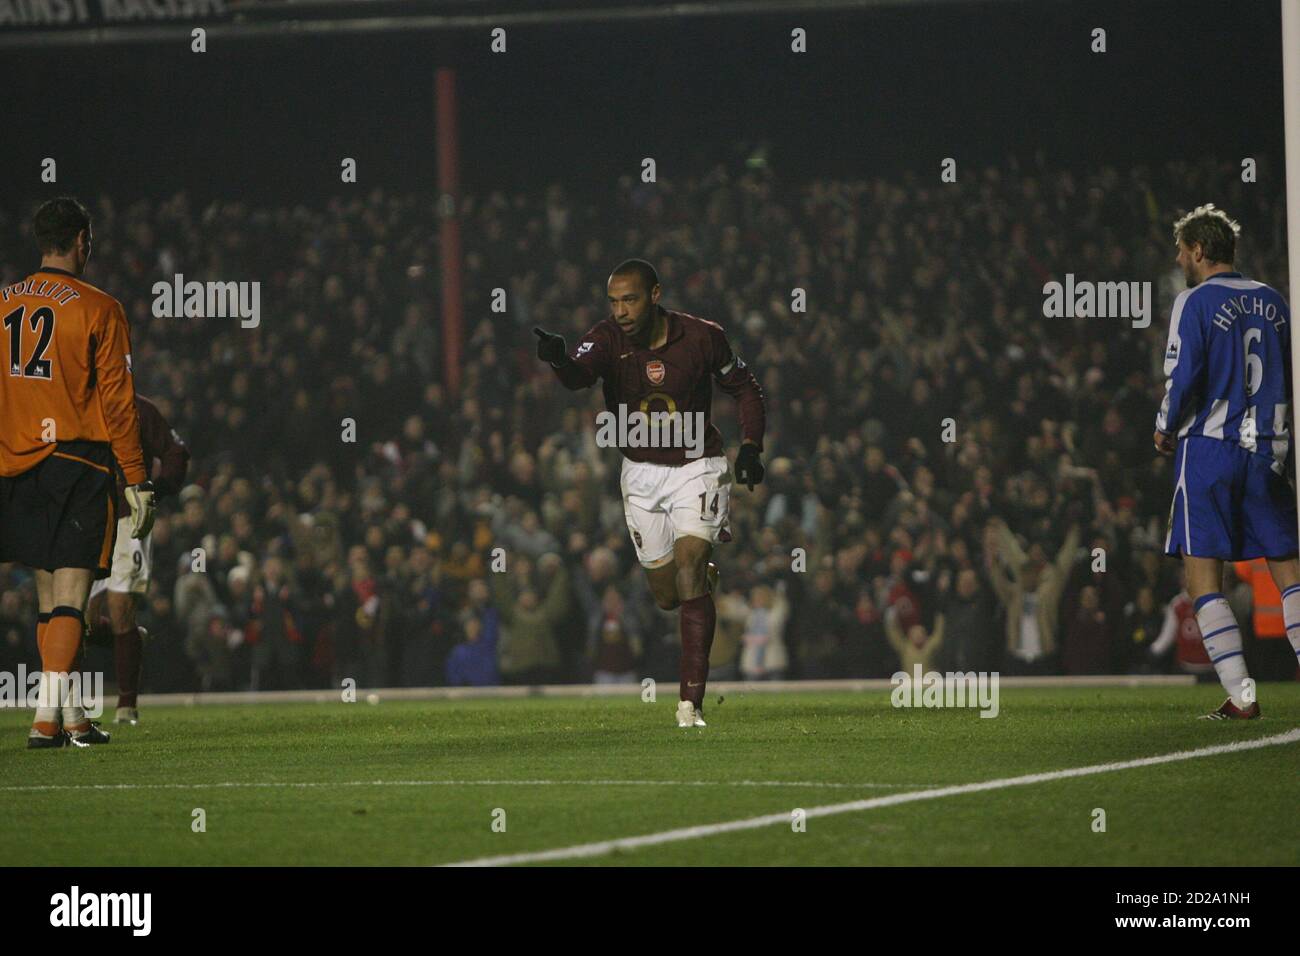 BEST QUALITY AVAILABLE (Uncropped)   Arsenal's Thierry Henry celebrates his goal during a semi-final second leg Carling Cup soccer match against Wigan Athletic at Highbury, London, January 24, 2006. REUTERS/Eddie Keogh 24/01/2006 Stock Photo